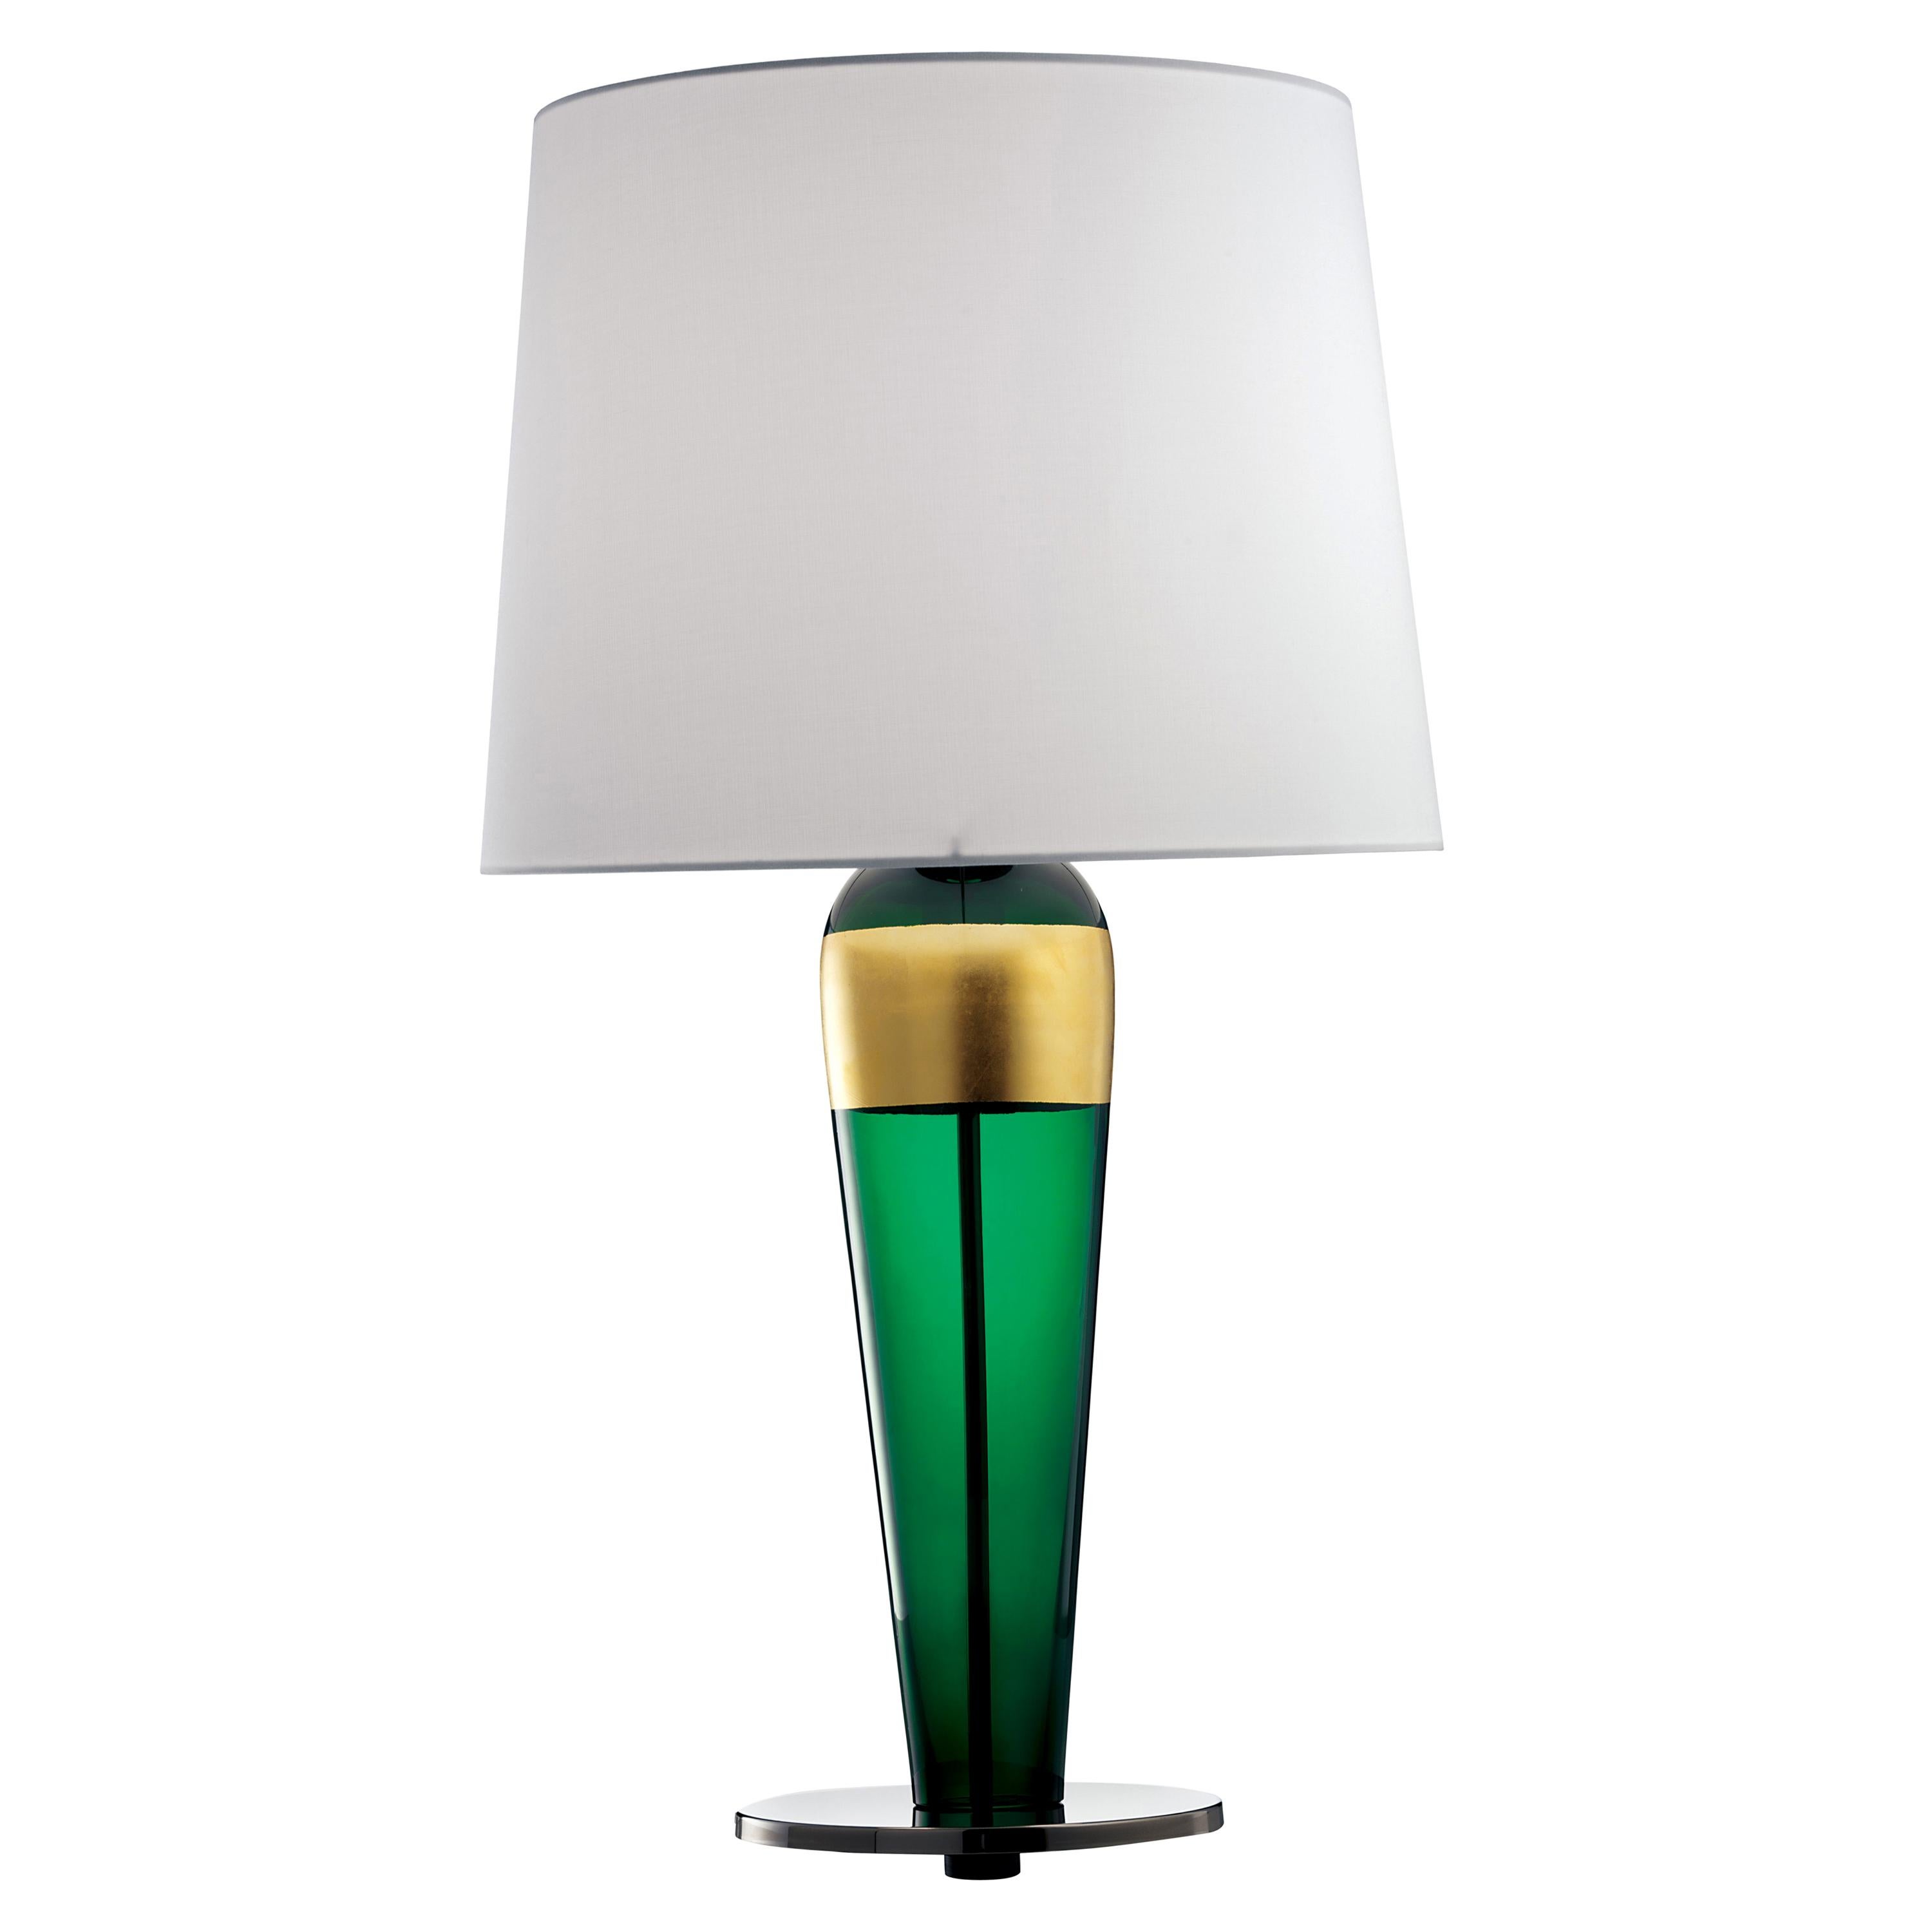 Sara 5574 Table Lamp in Glass with White Shade, by Barovier&Toso